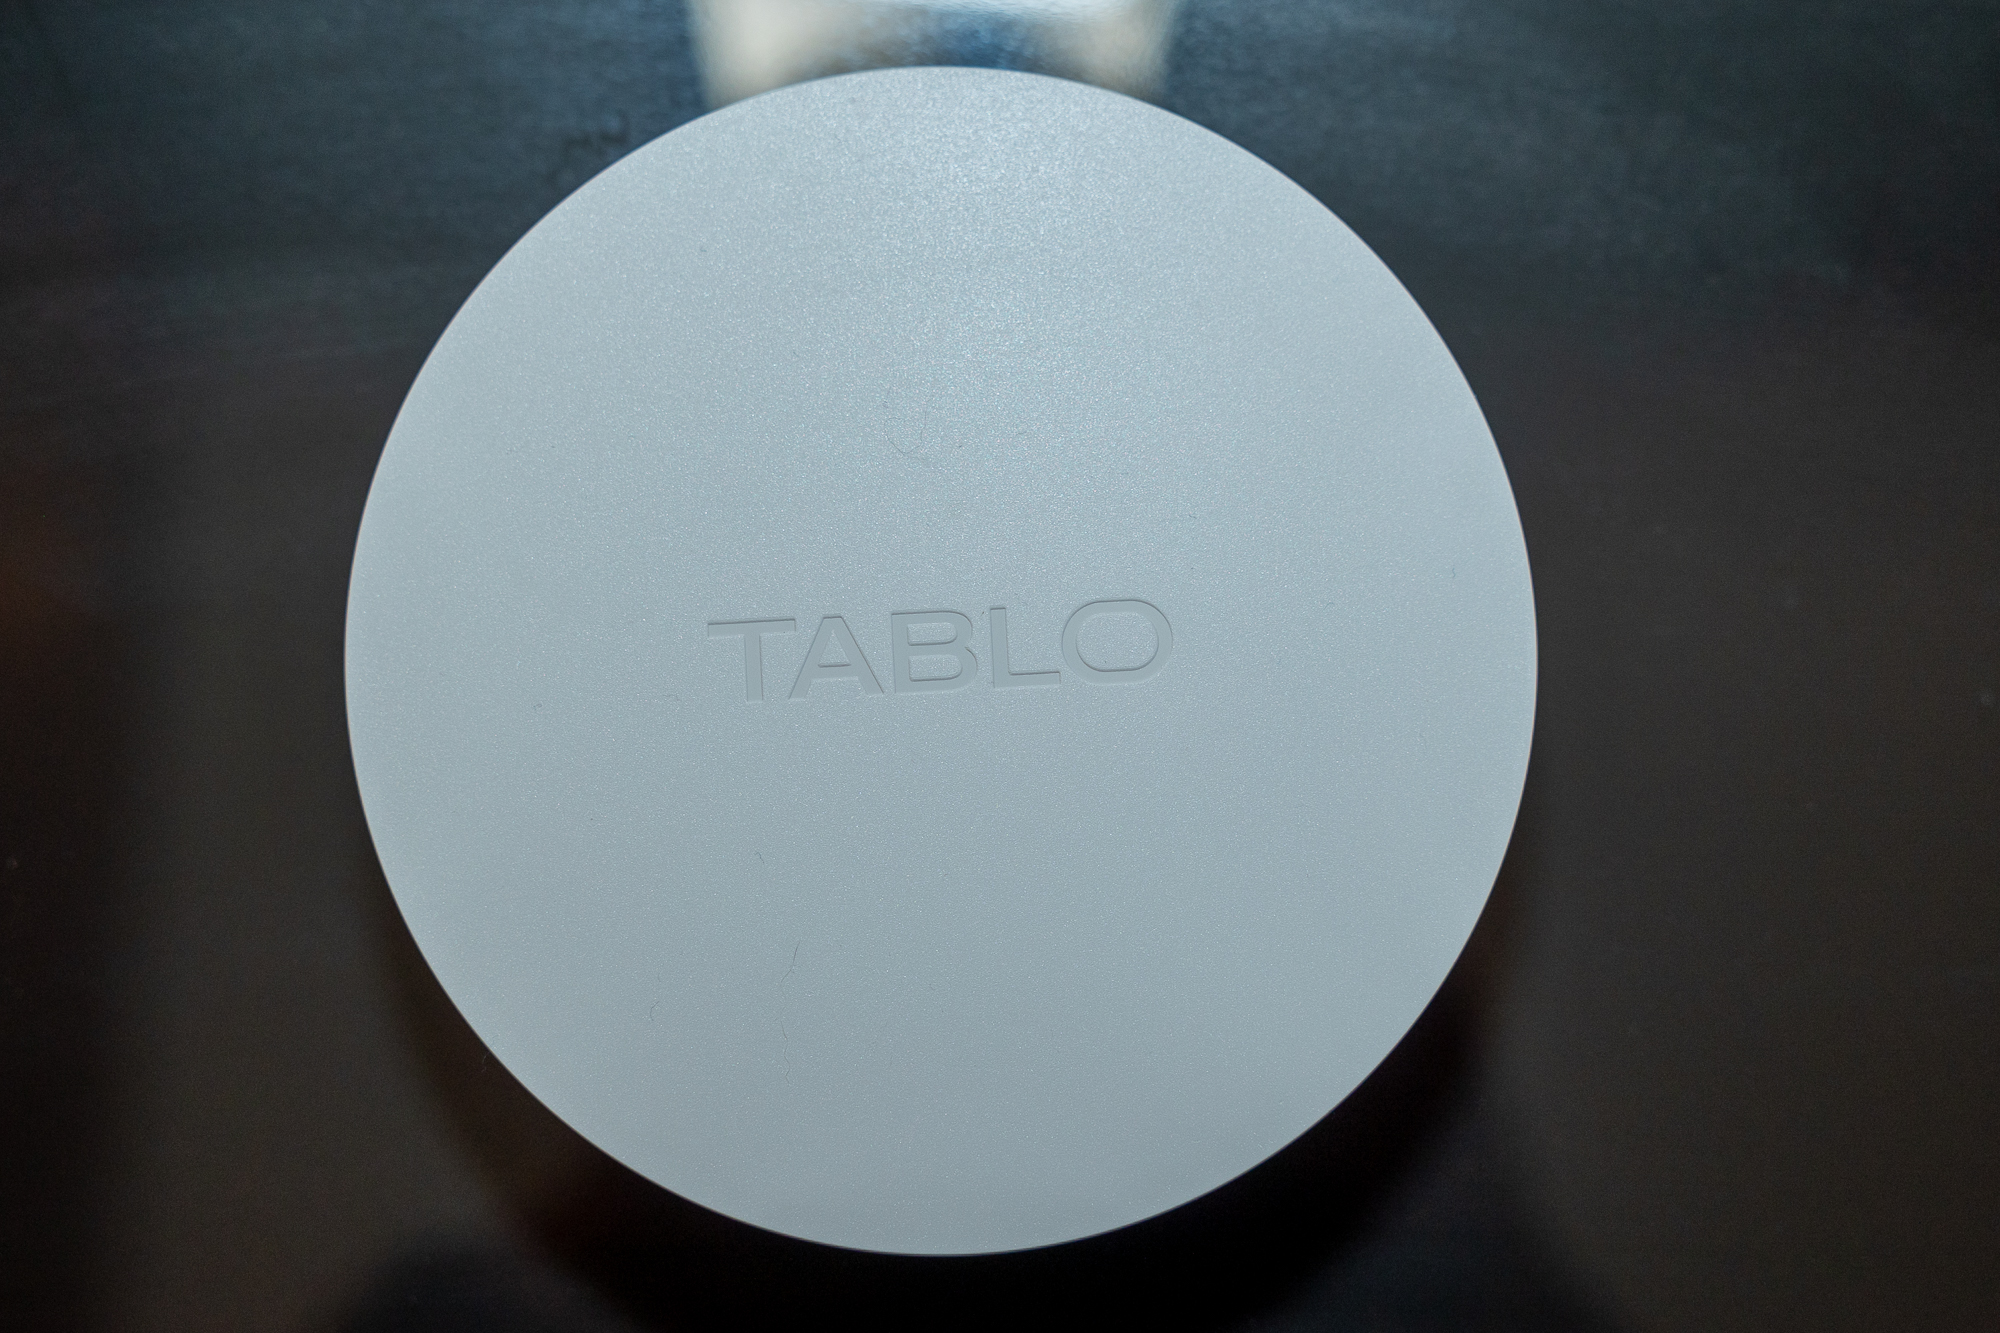 Tablo TV fourth-generation box as seen from the top.